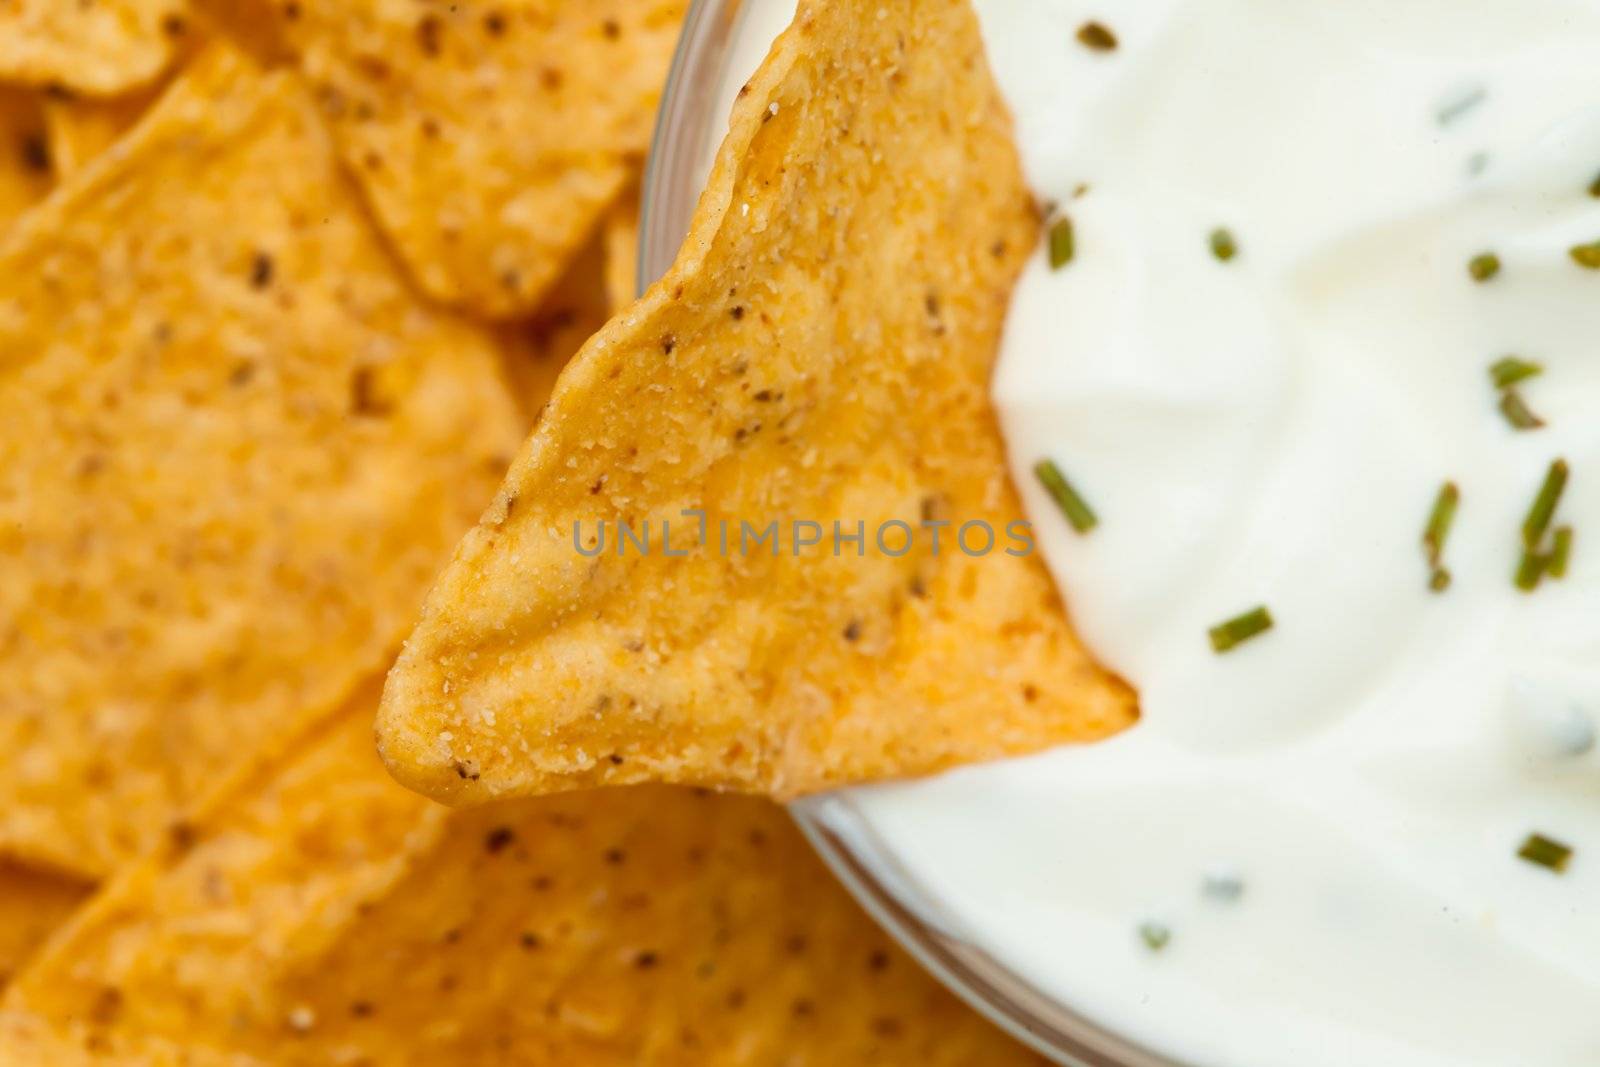 Close up of a nacho dipped into a bowl of dip by Wavebreakmedia